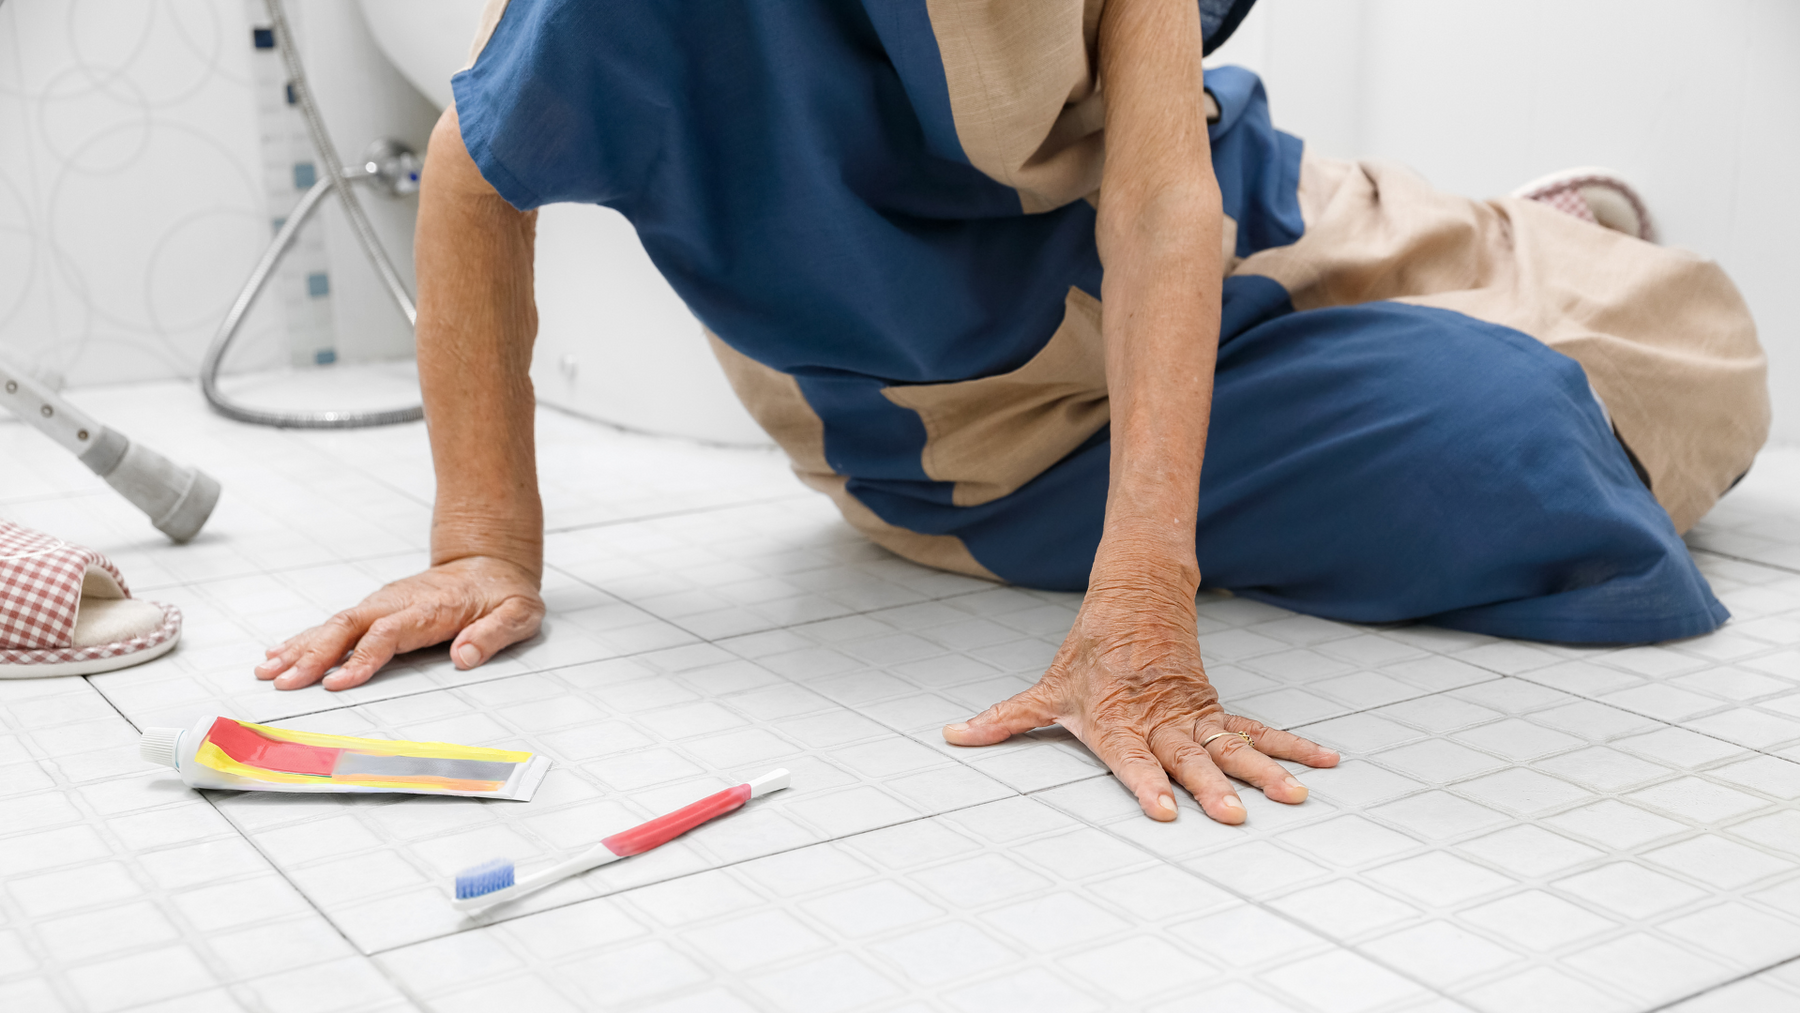 Ensuring Safety in the Bathroom: Tips to Prevent Falls